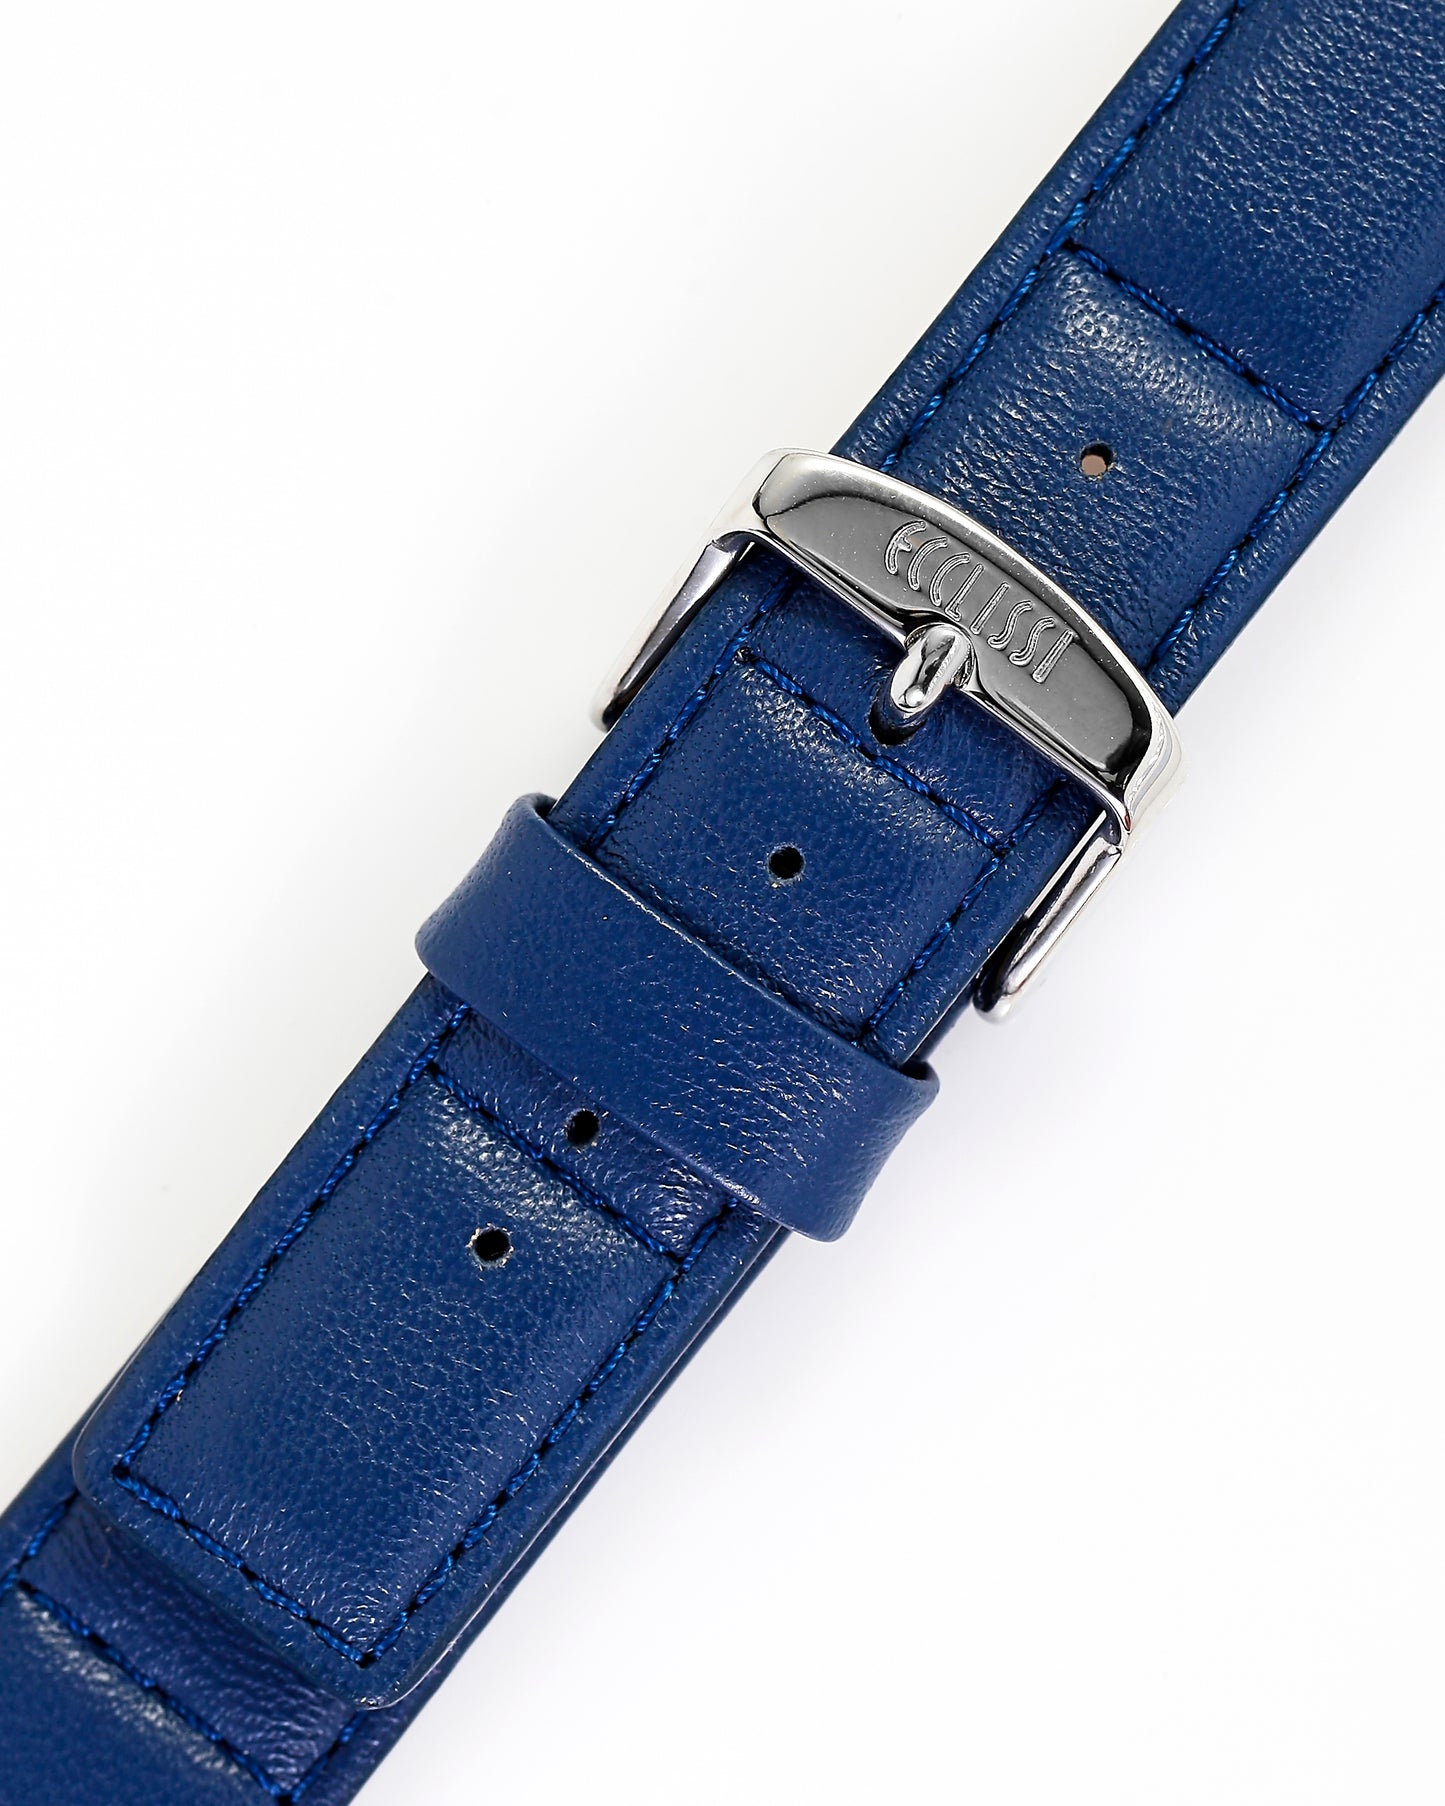 Ecclissi 20mm x 18mm Blue Leather Strap with original Buckle 75395